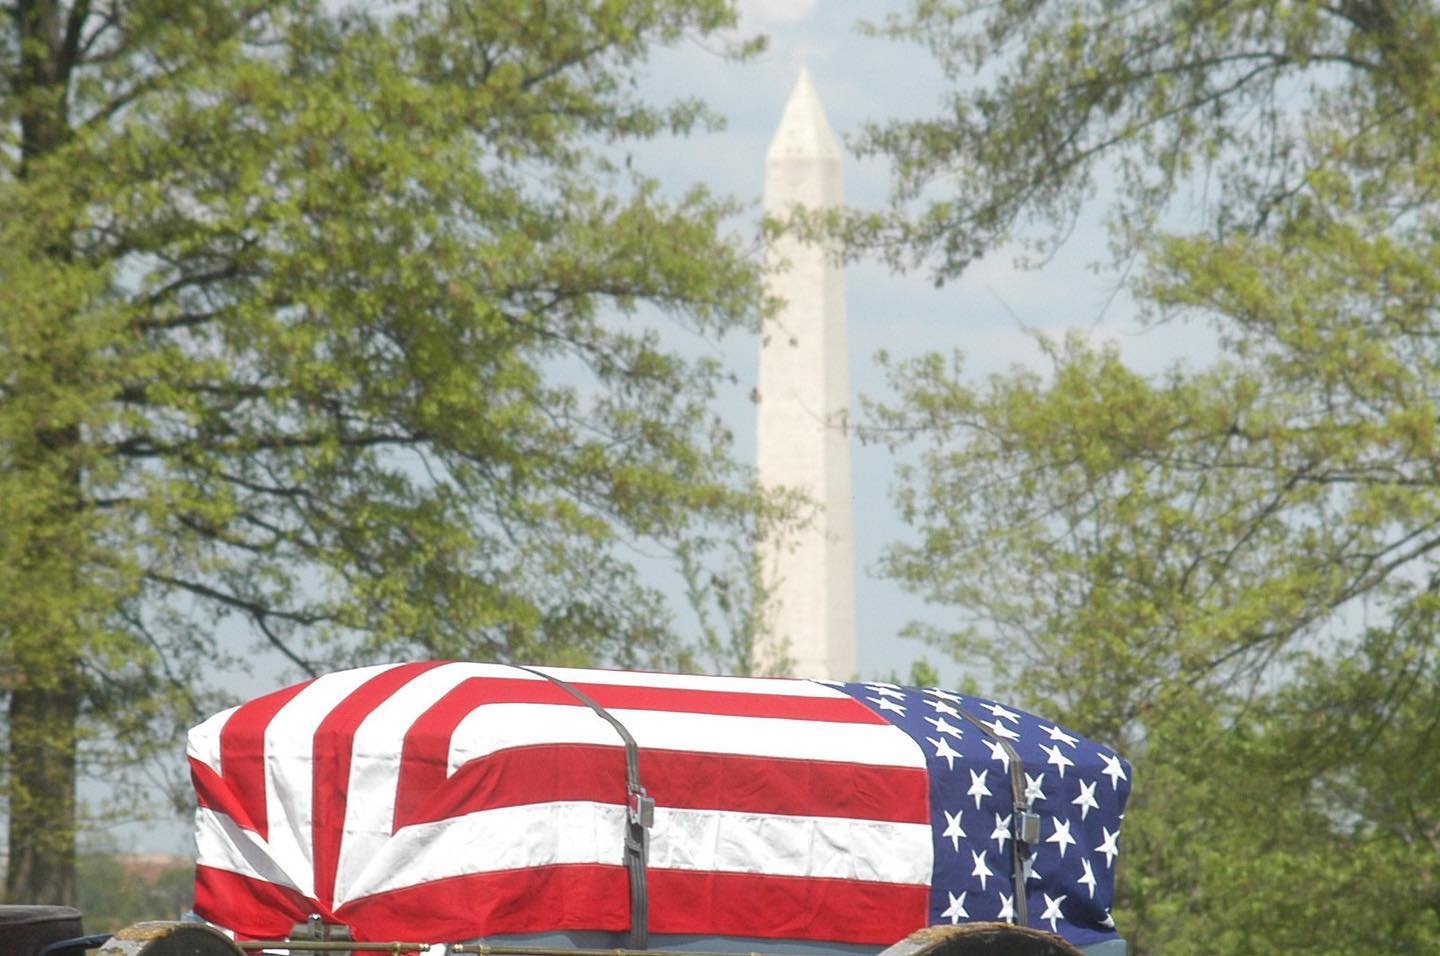 A caisson escorting the remains of a veteran travel to their final resting place, under the shadow of the Washington Monument, as seen from Arlington National Cemetery. 

Recently, a push and change in legislature advocated for Medal of Honor recipients and prisoners of war to  receive full military honors at Arlington National Cemetery.

“Full military honors ceremonies remind us of the service and valor demonstrated by those who have defended, protected, and sacrificed for freedom and democracy,” Rep. Jimmy Panetta (D-Calif.) said in a statement. A Navy veteran himself, Panetta introduced the legislation in the House.

“This is a simple, but necessary fix that provides these selfless veterans with the honors they deserve,” Rep. Dan Crenshaw (R-Texas), a Navy SEAL veteran who co-sponsored the House bill stated.

In the case of Medal of Honor recipients, Arlington National Cemetery currently offers “full military honors,” though it's a relatively new development, having gone into effect on Jan. 11, 2019.